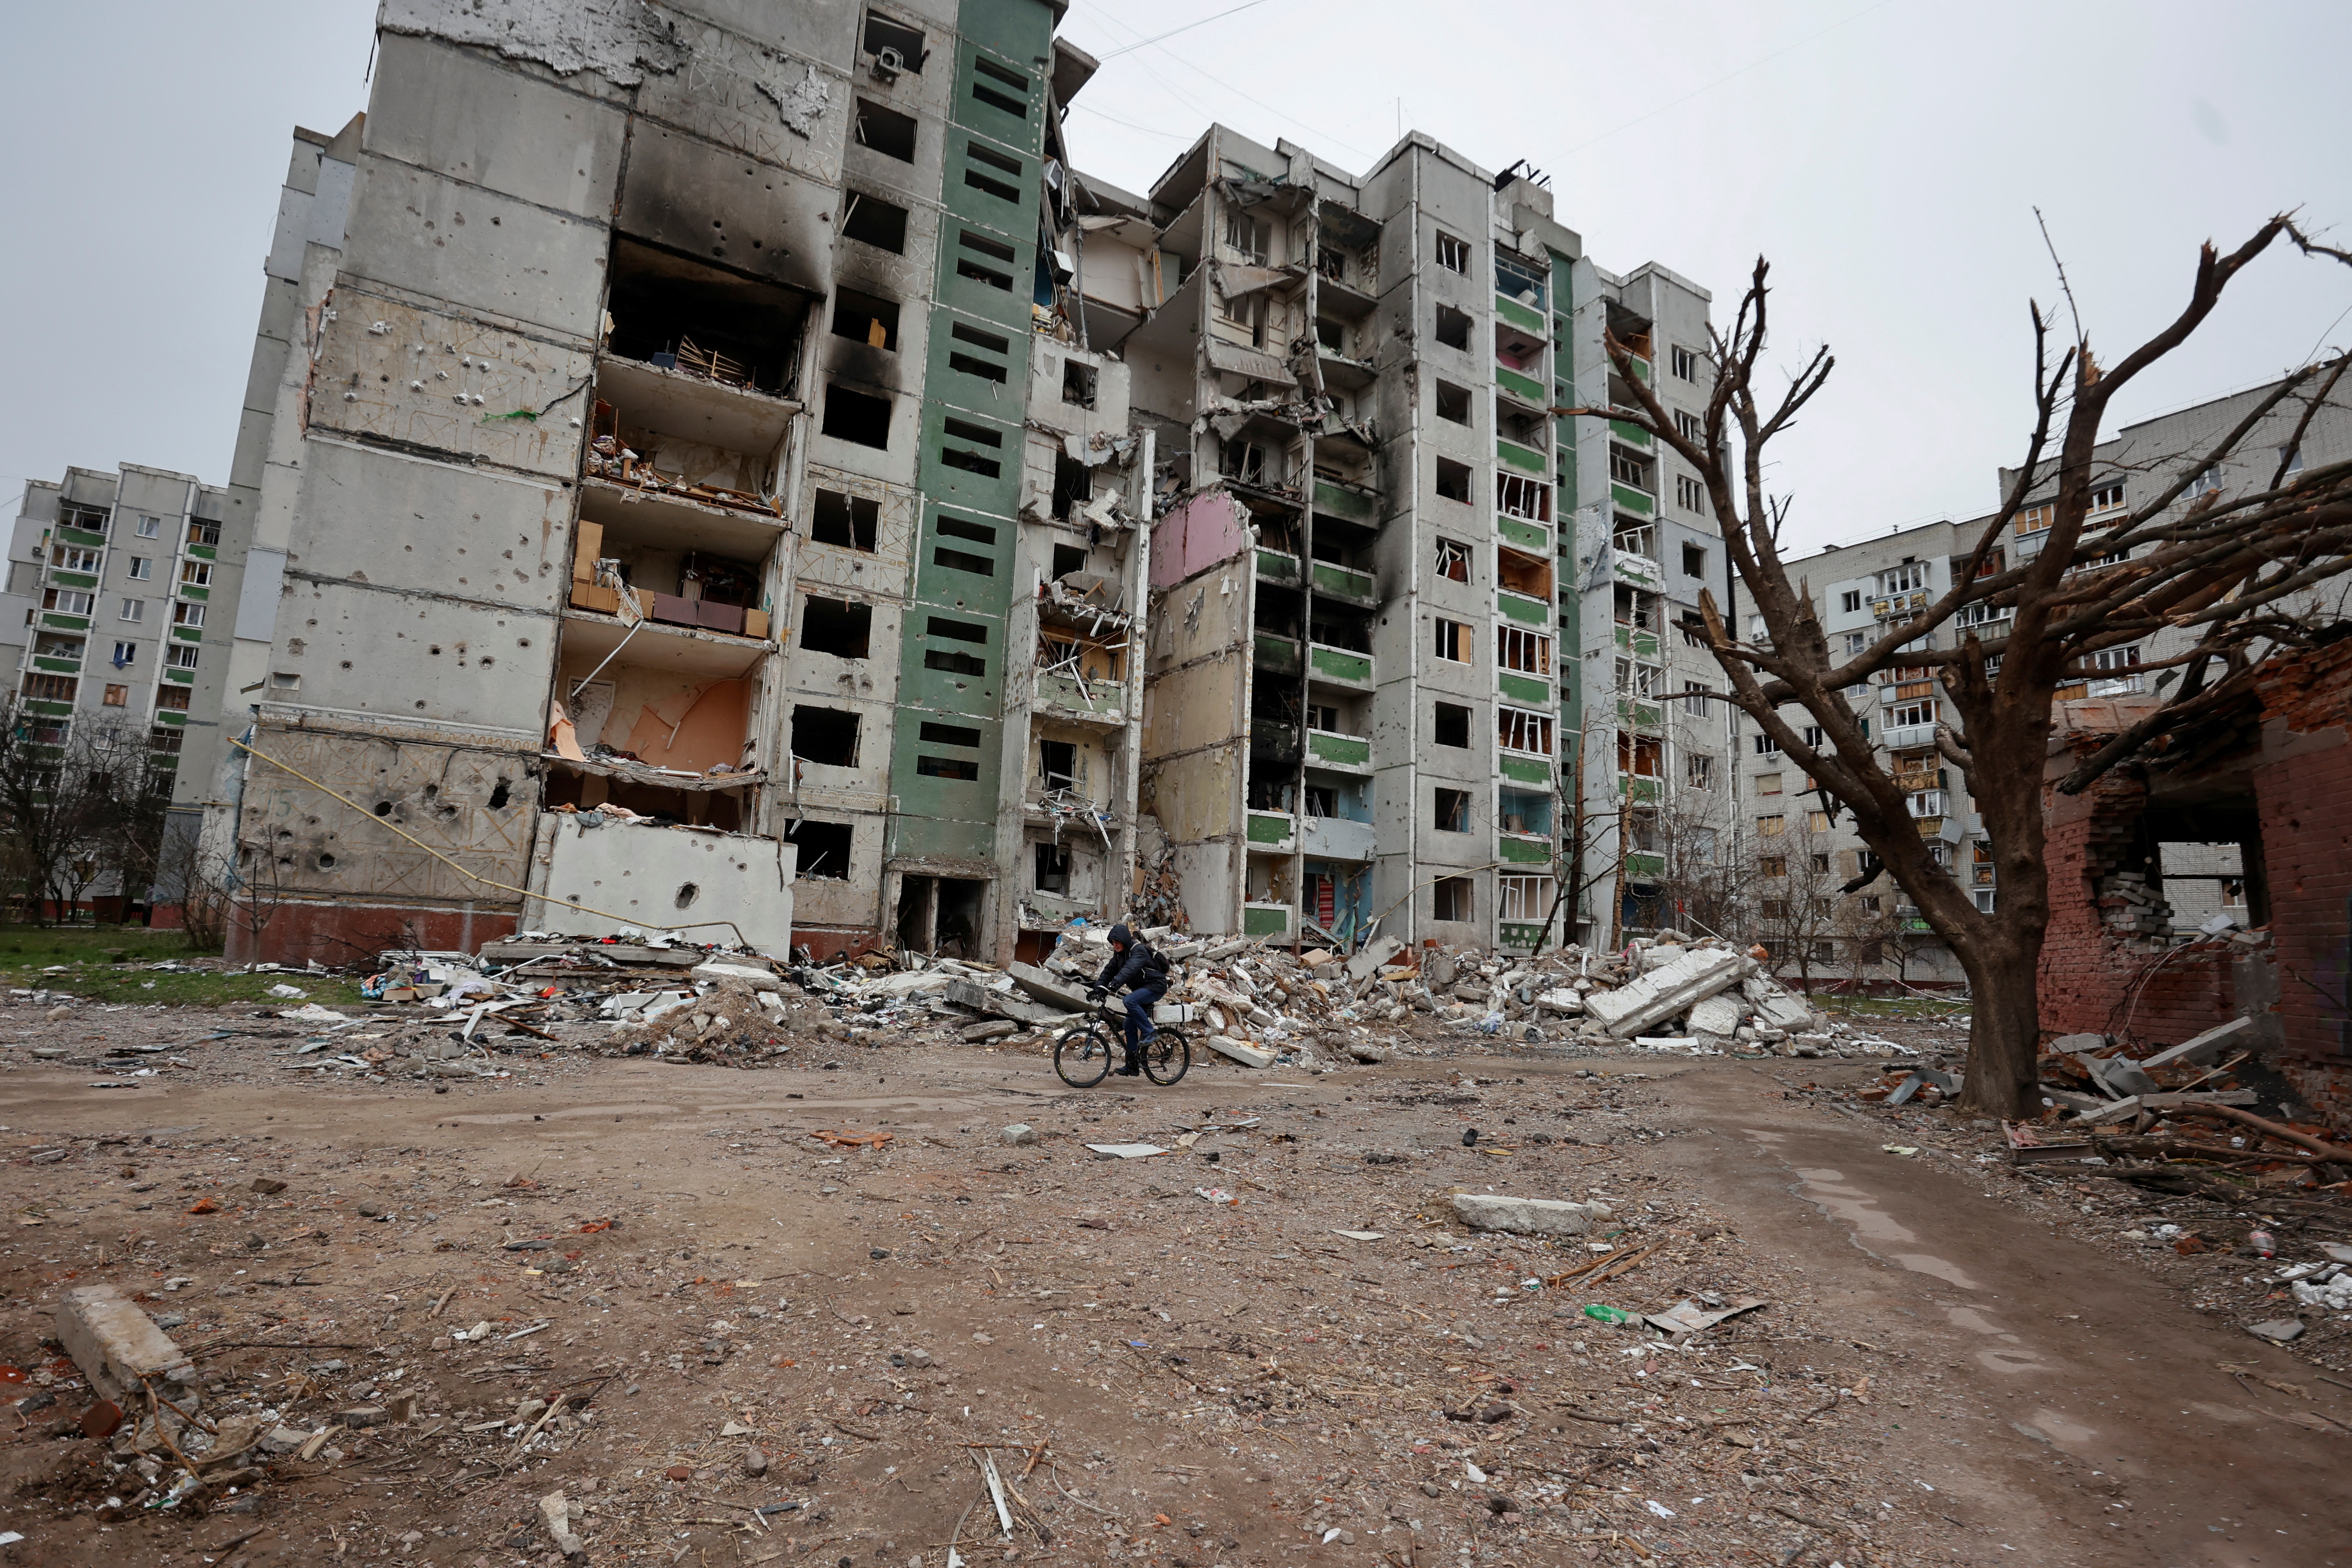 A local man rides a bicycle next to an apartment building damaged by heavy shelling in Chernihiv